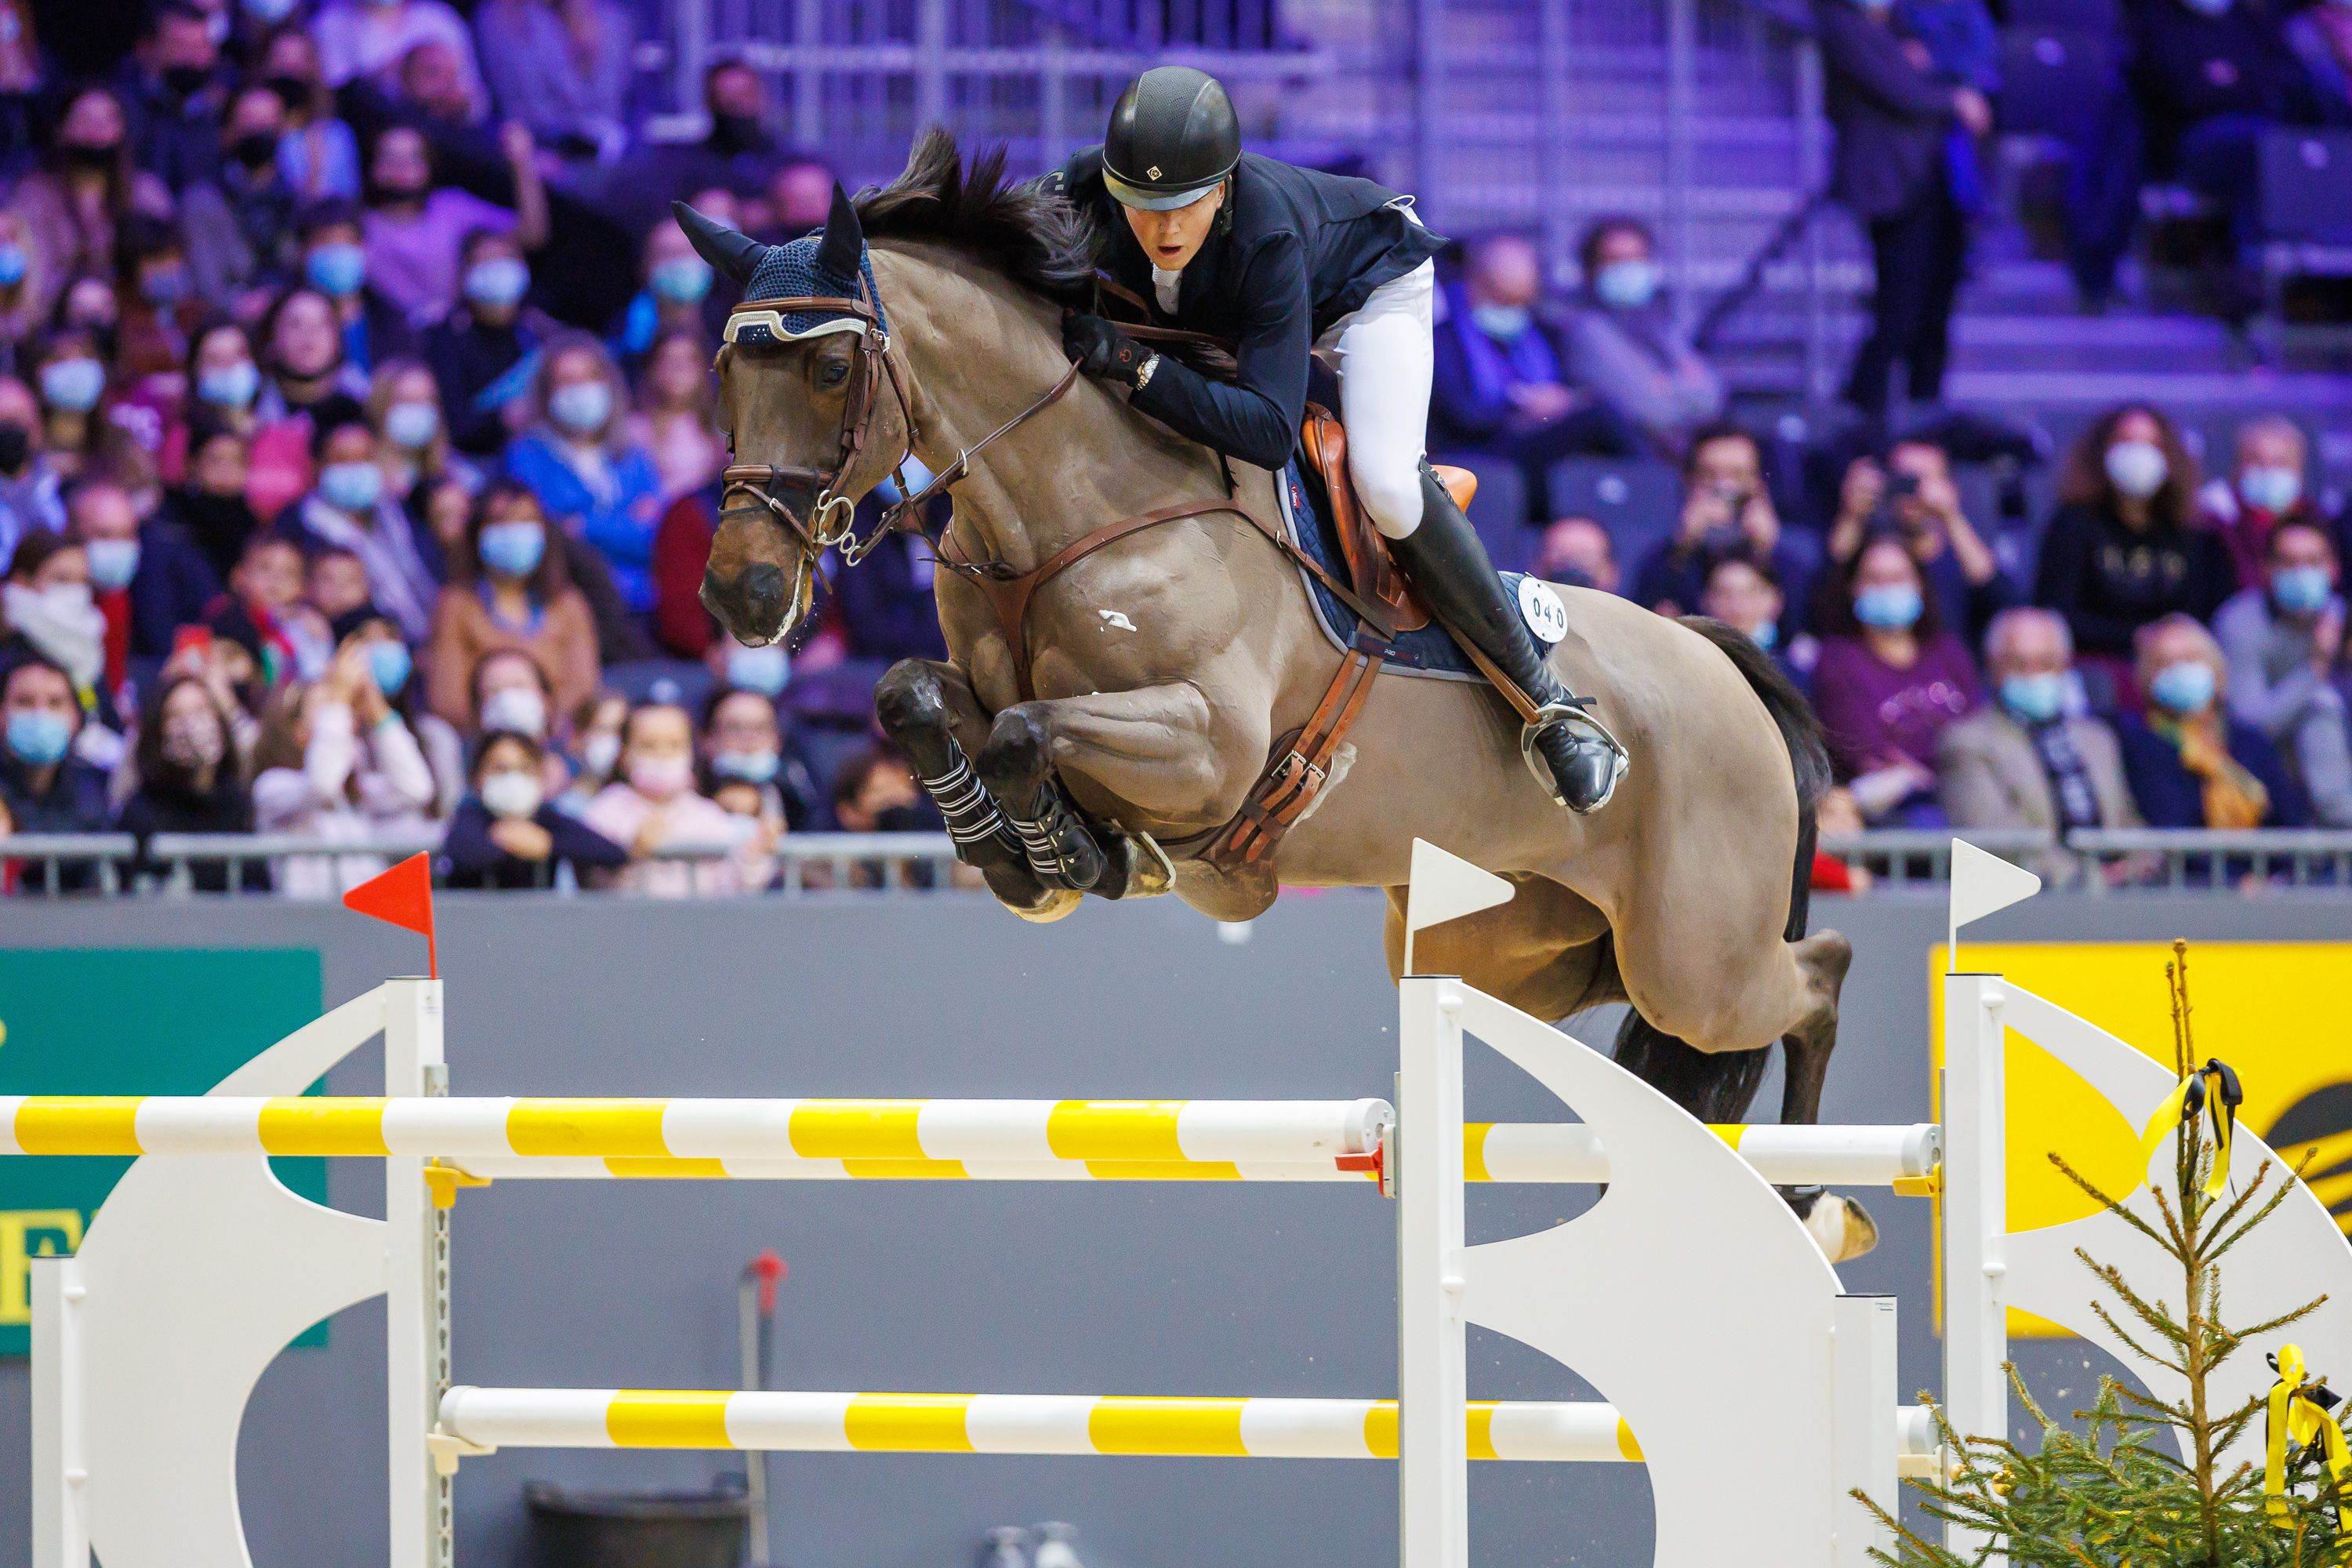 Harry Charles claims victory in the 1.60m Coupe de Genève class